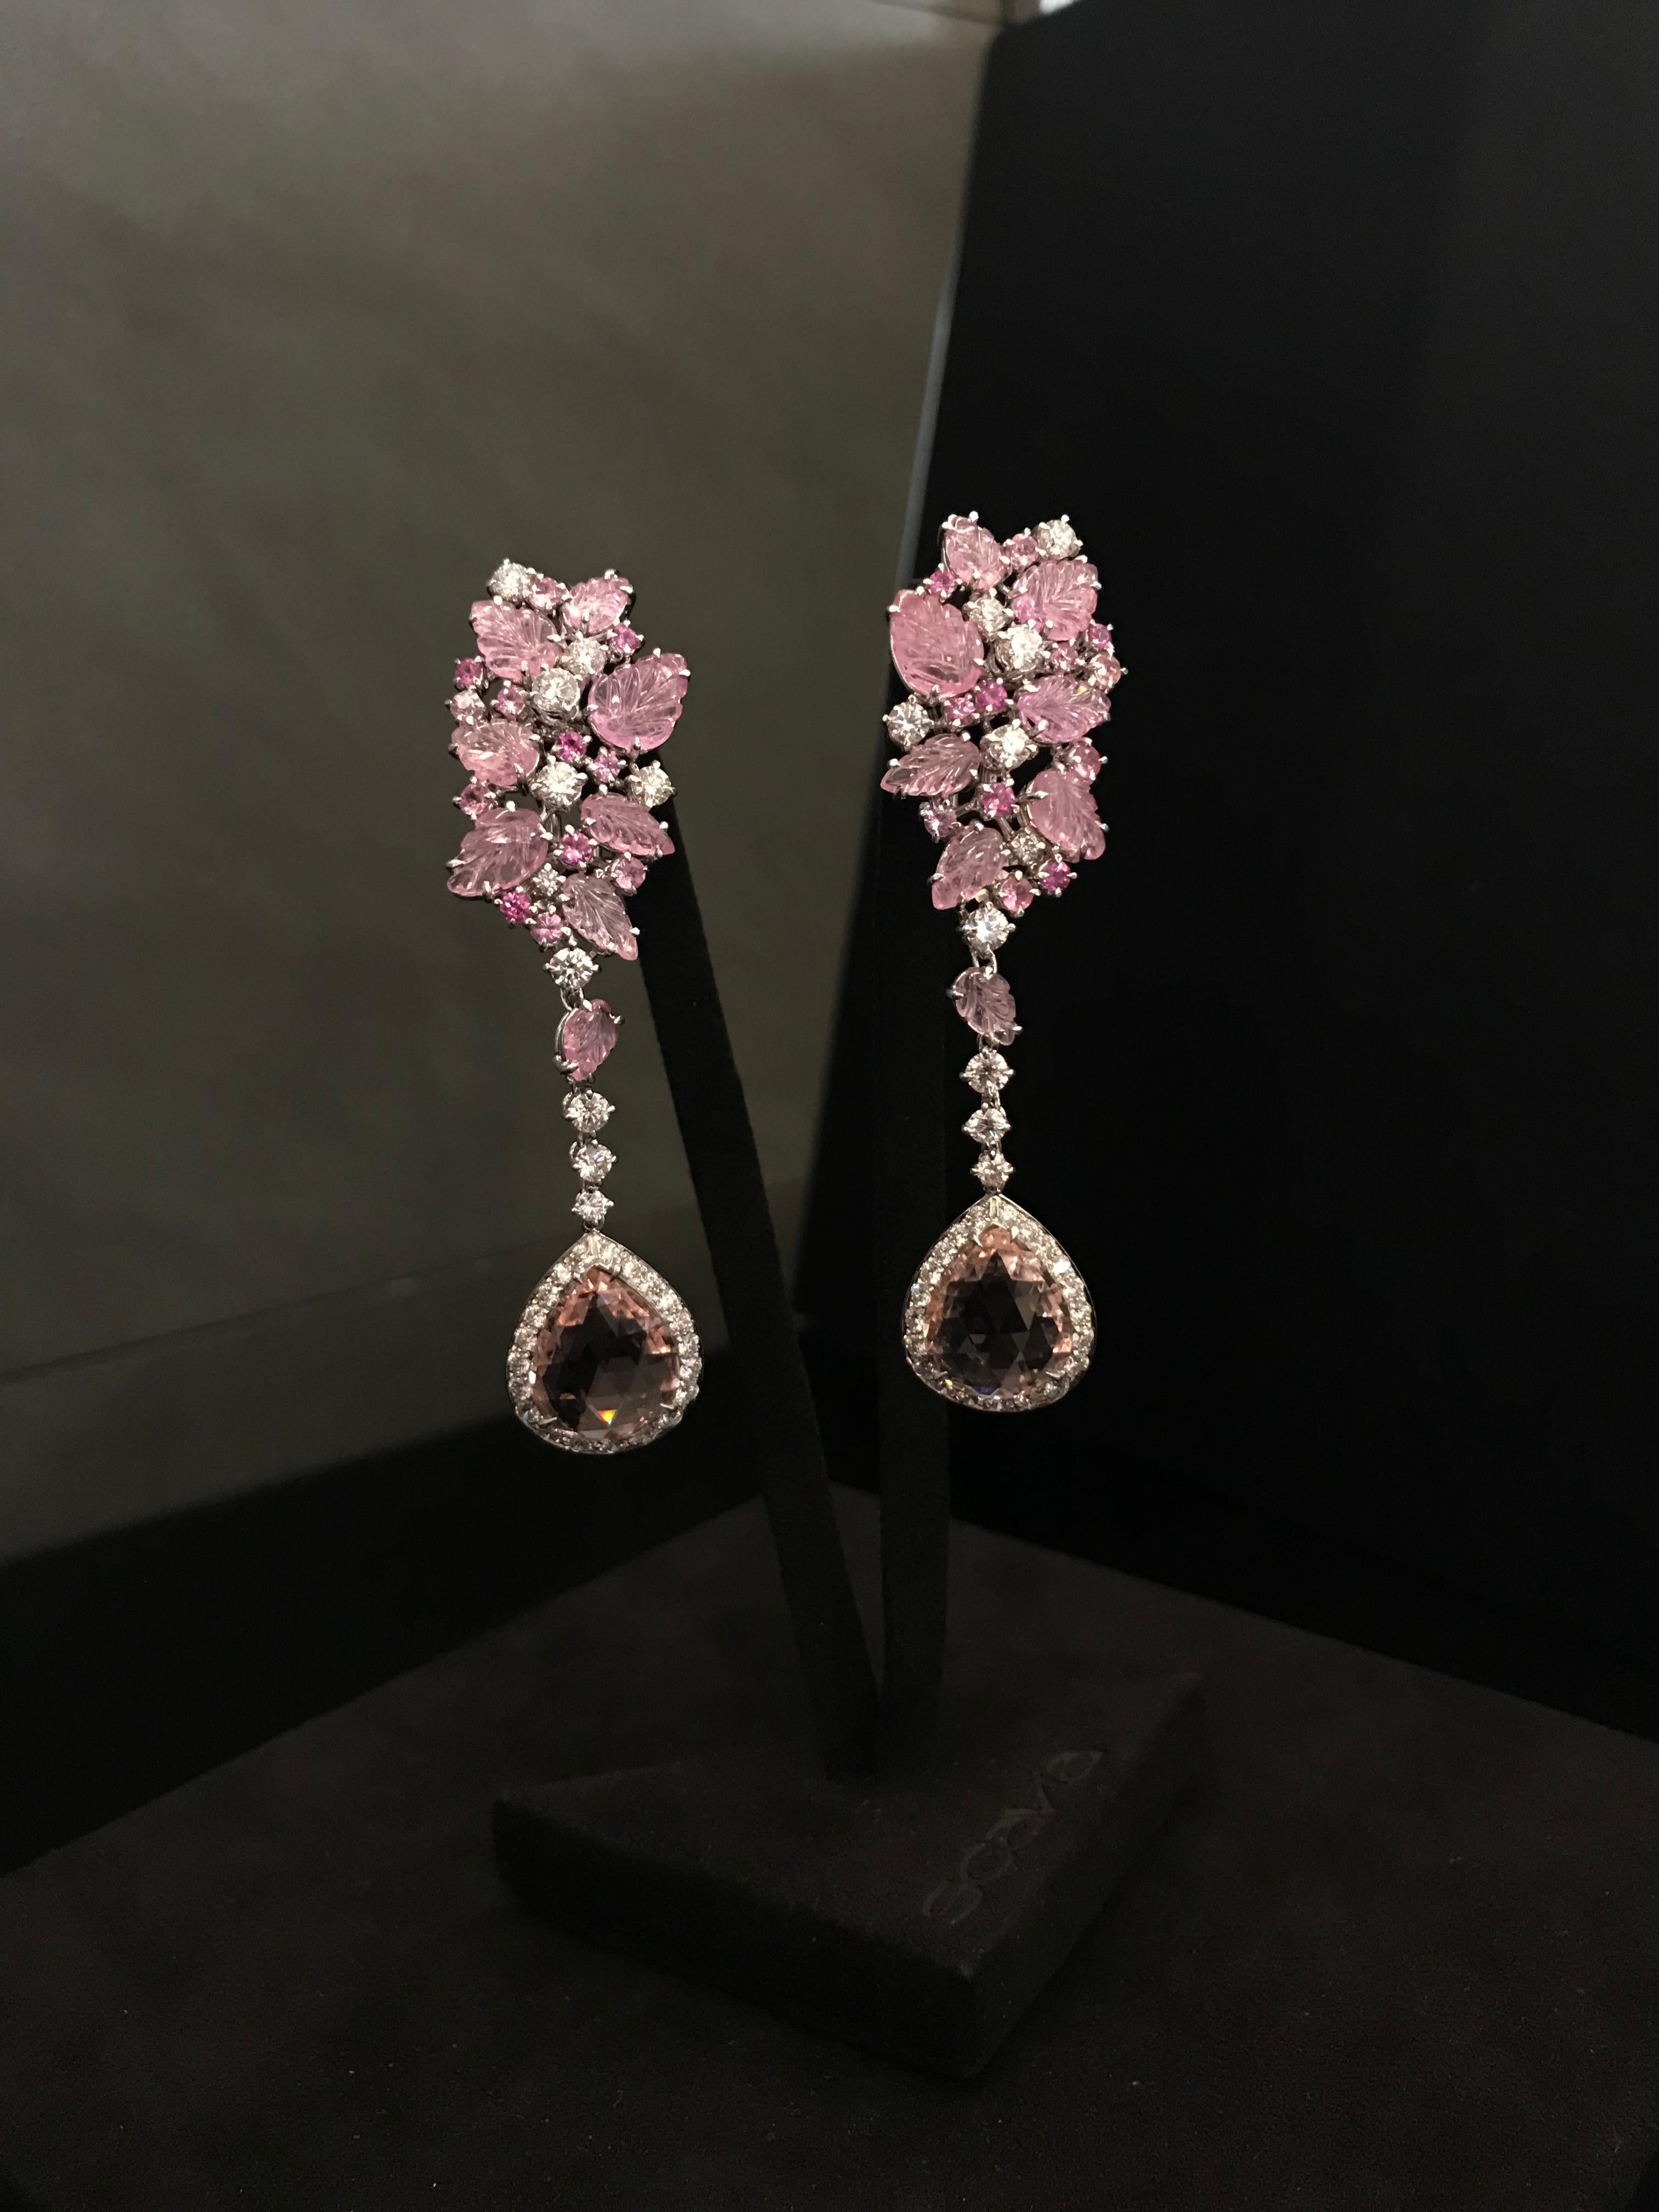 Contemporary Chandelier Earrings Gold Diamonds Pink Sapphires Pink Tourmaline For Sale